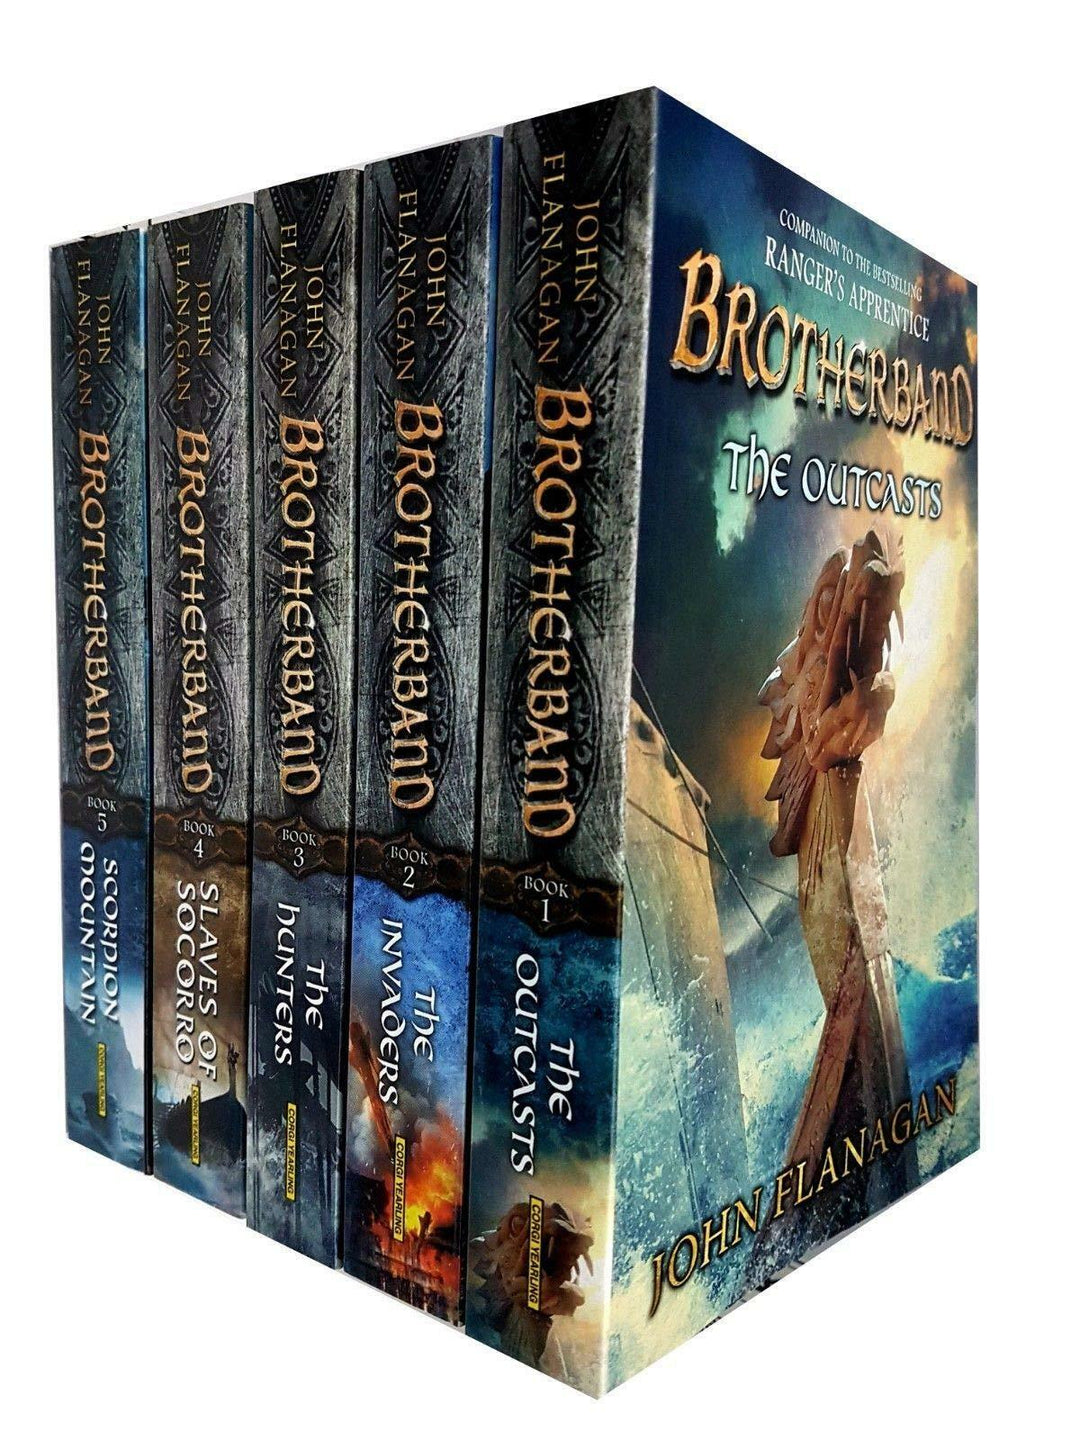 Brotherband Chronicles Series 6 Books Adult Pack Paperback Set By- John Flanagan - St Stephens Books